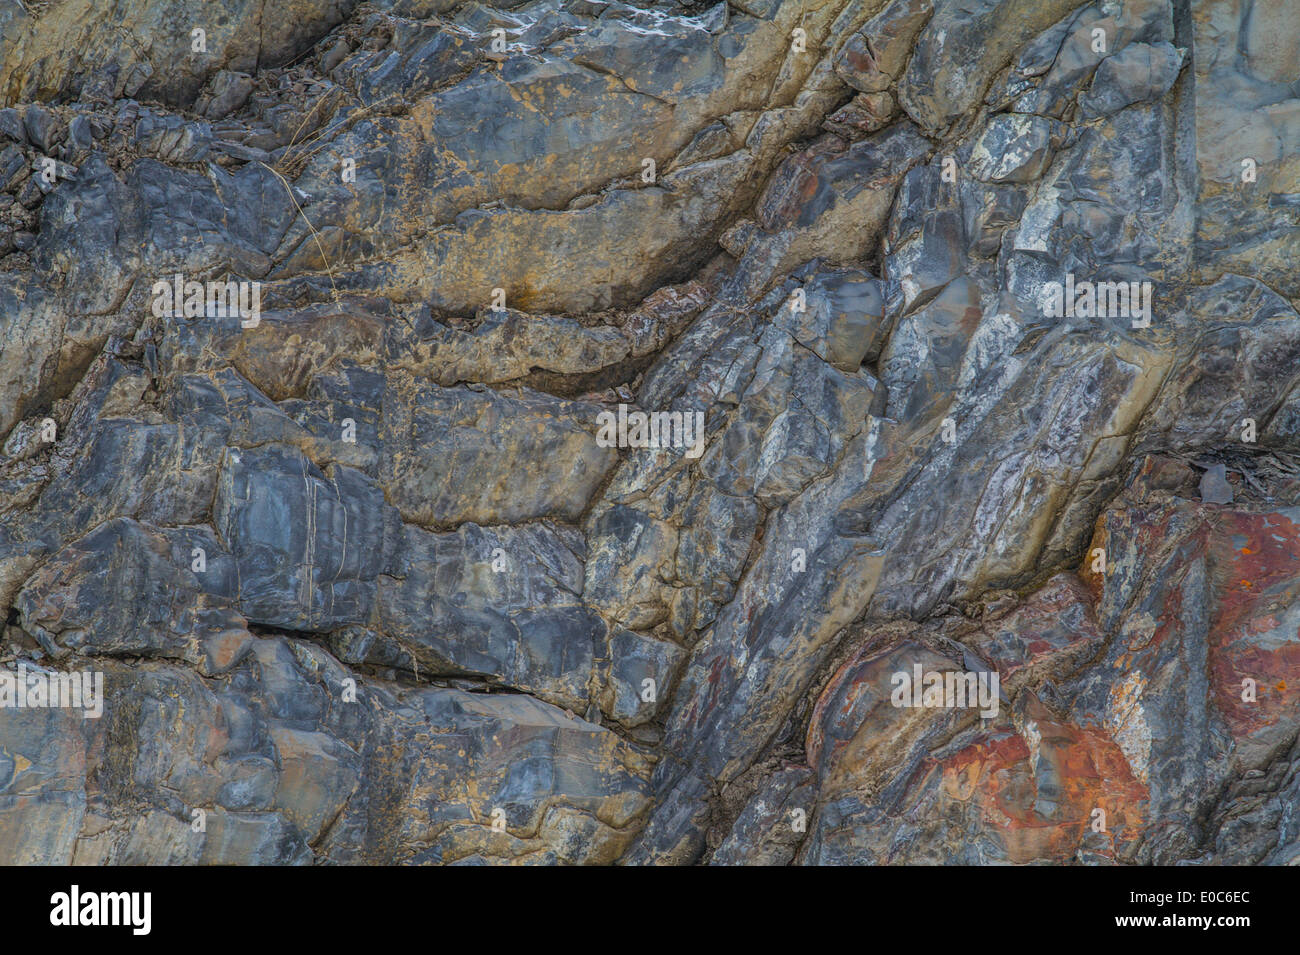 Rugged, textured, mountain rock face, full frame shot. Stock Photo